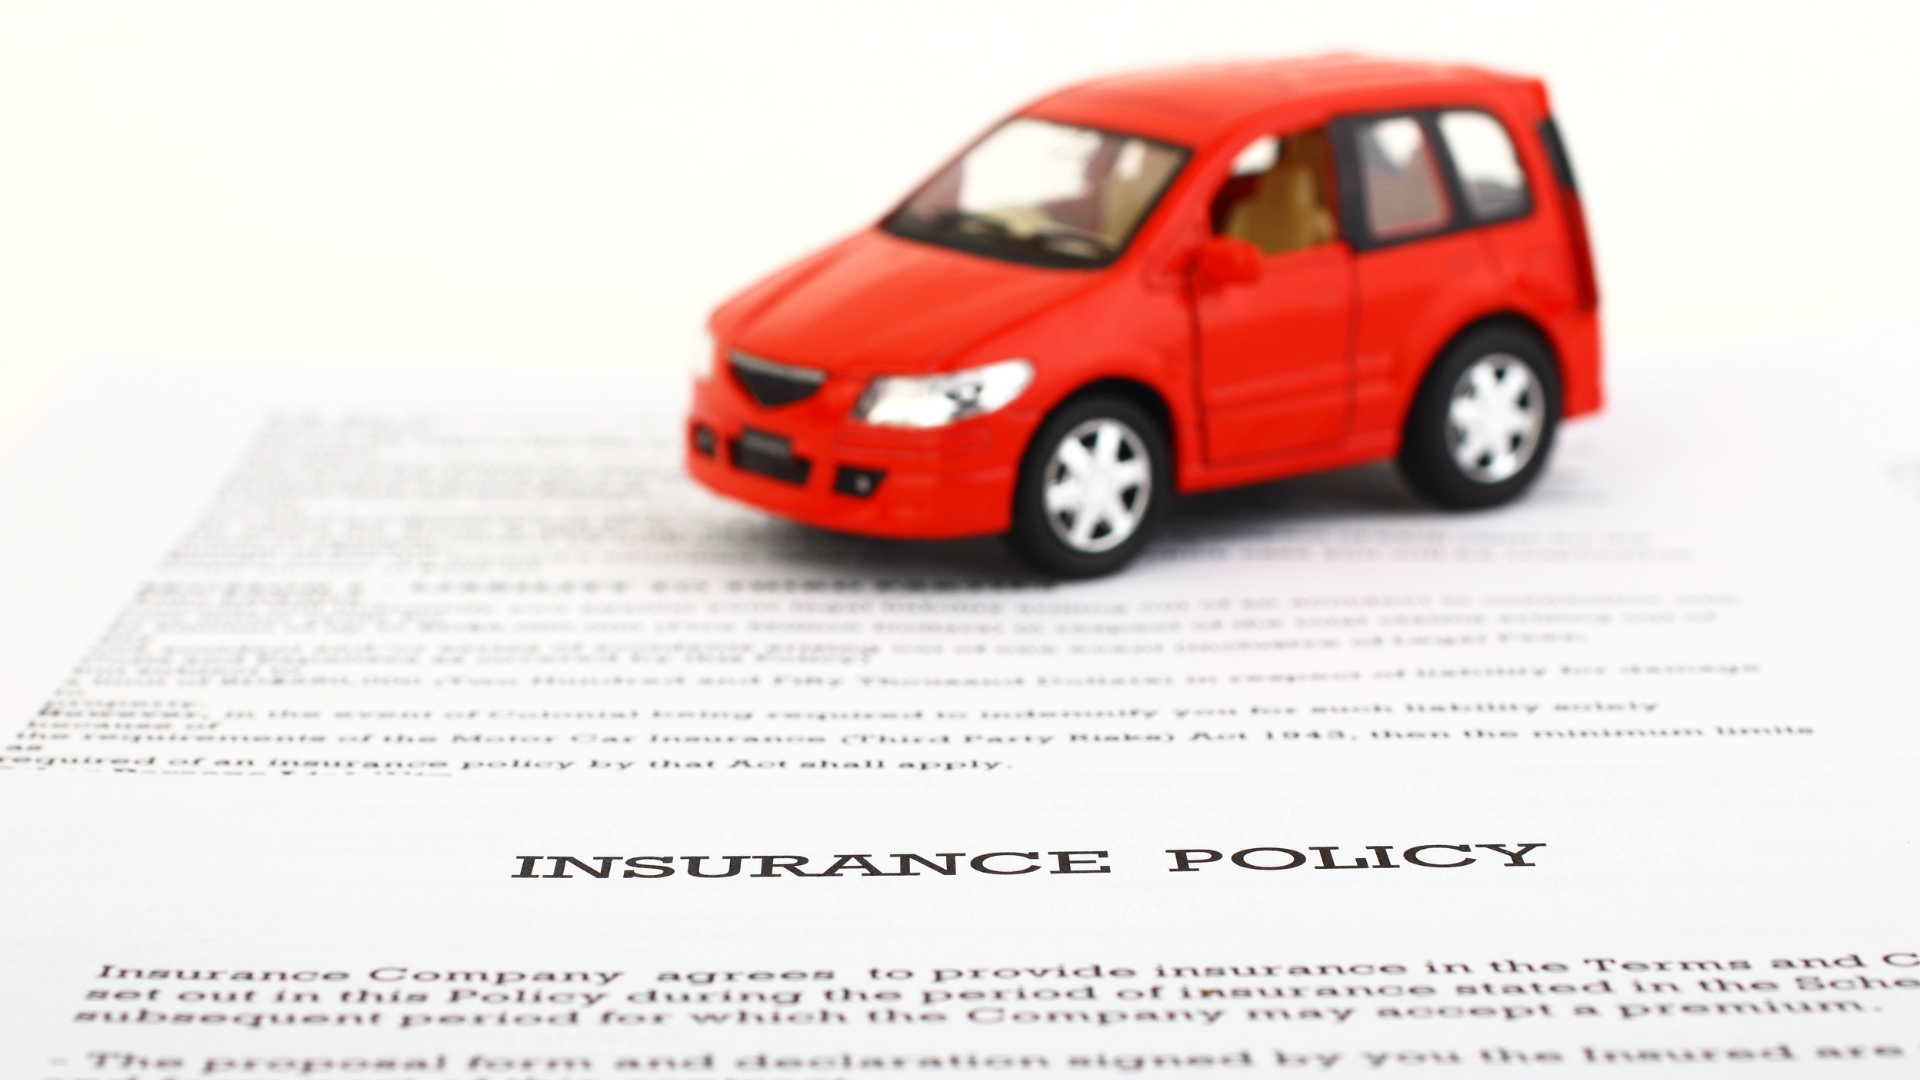 A toy car on top of an insurance policy